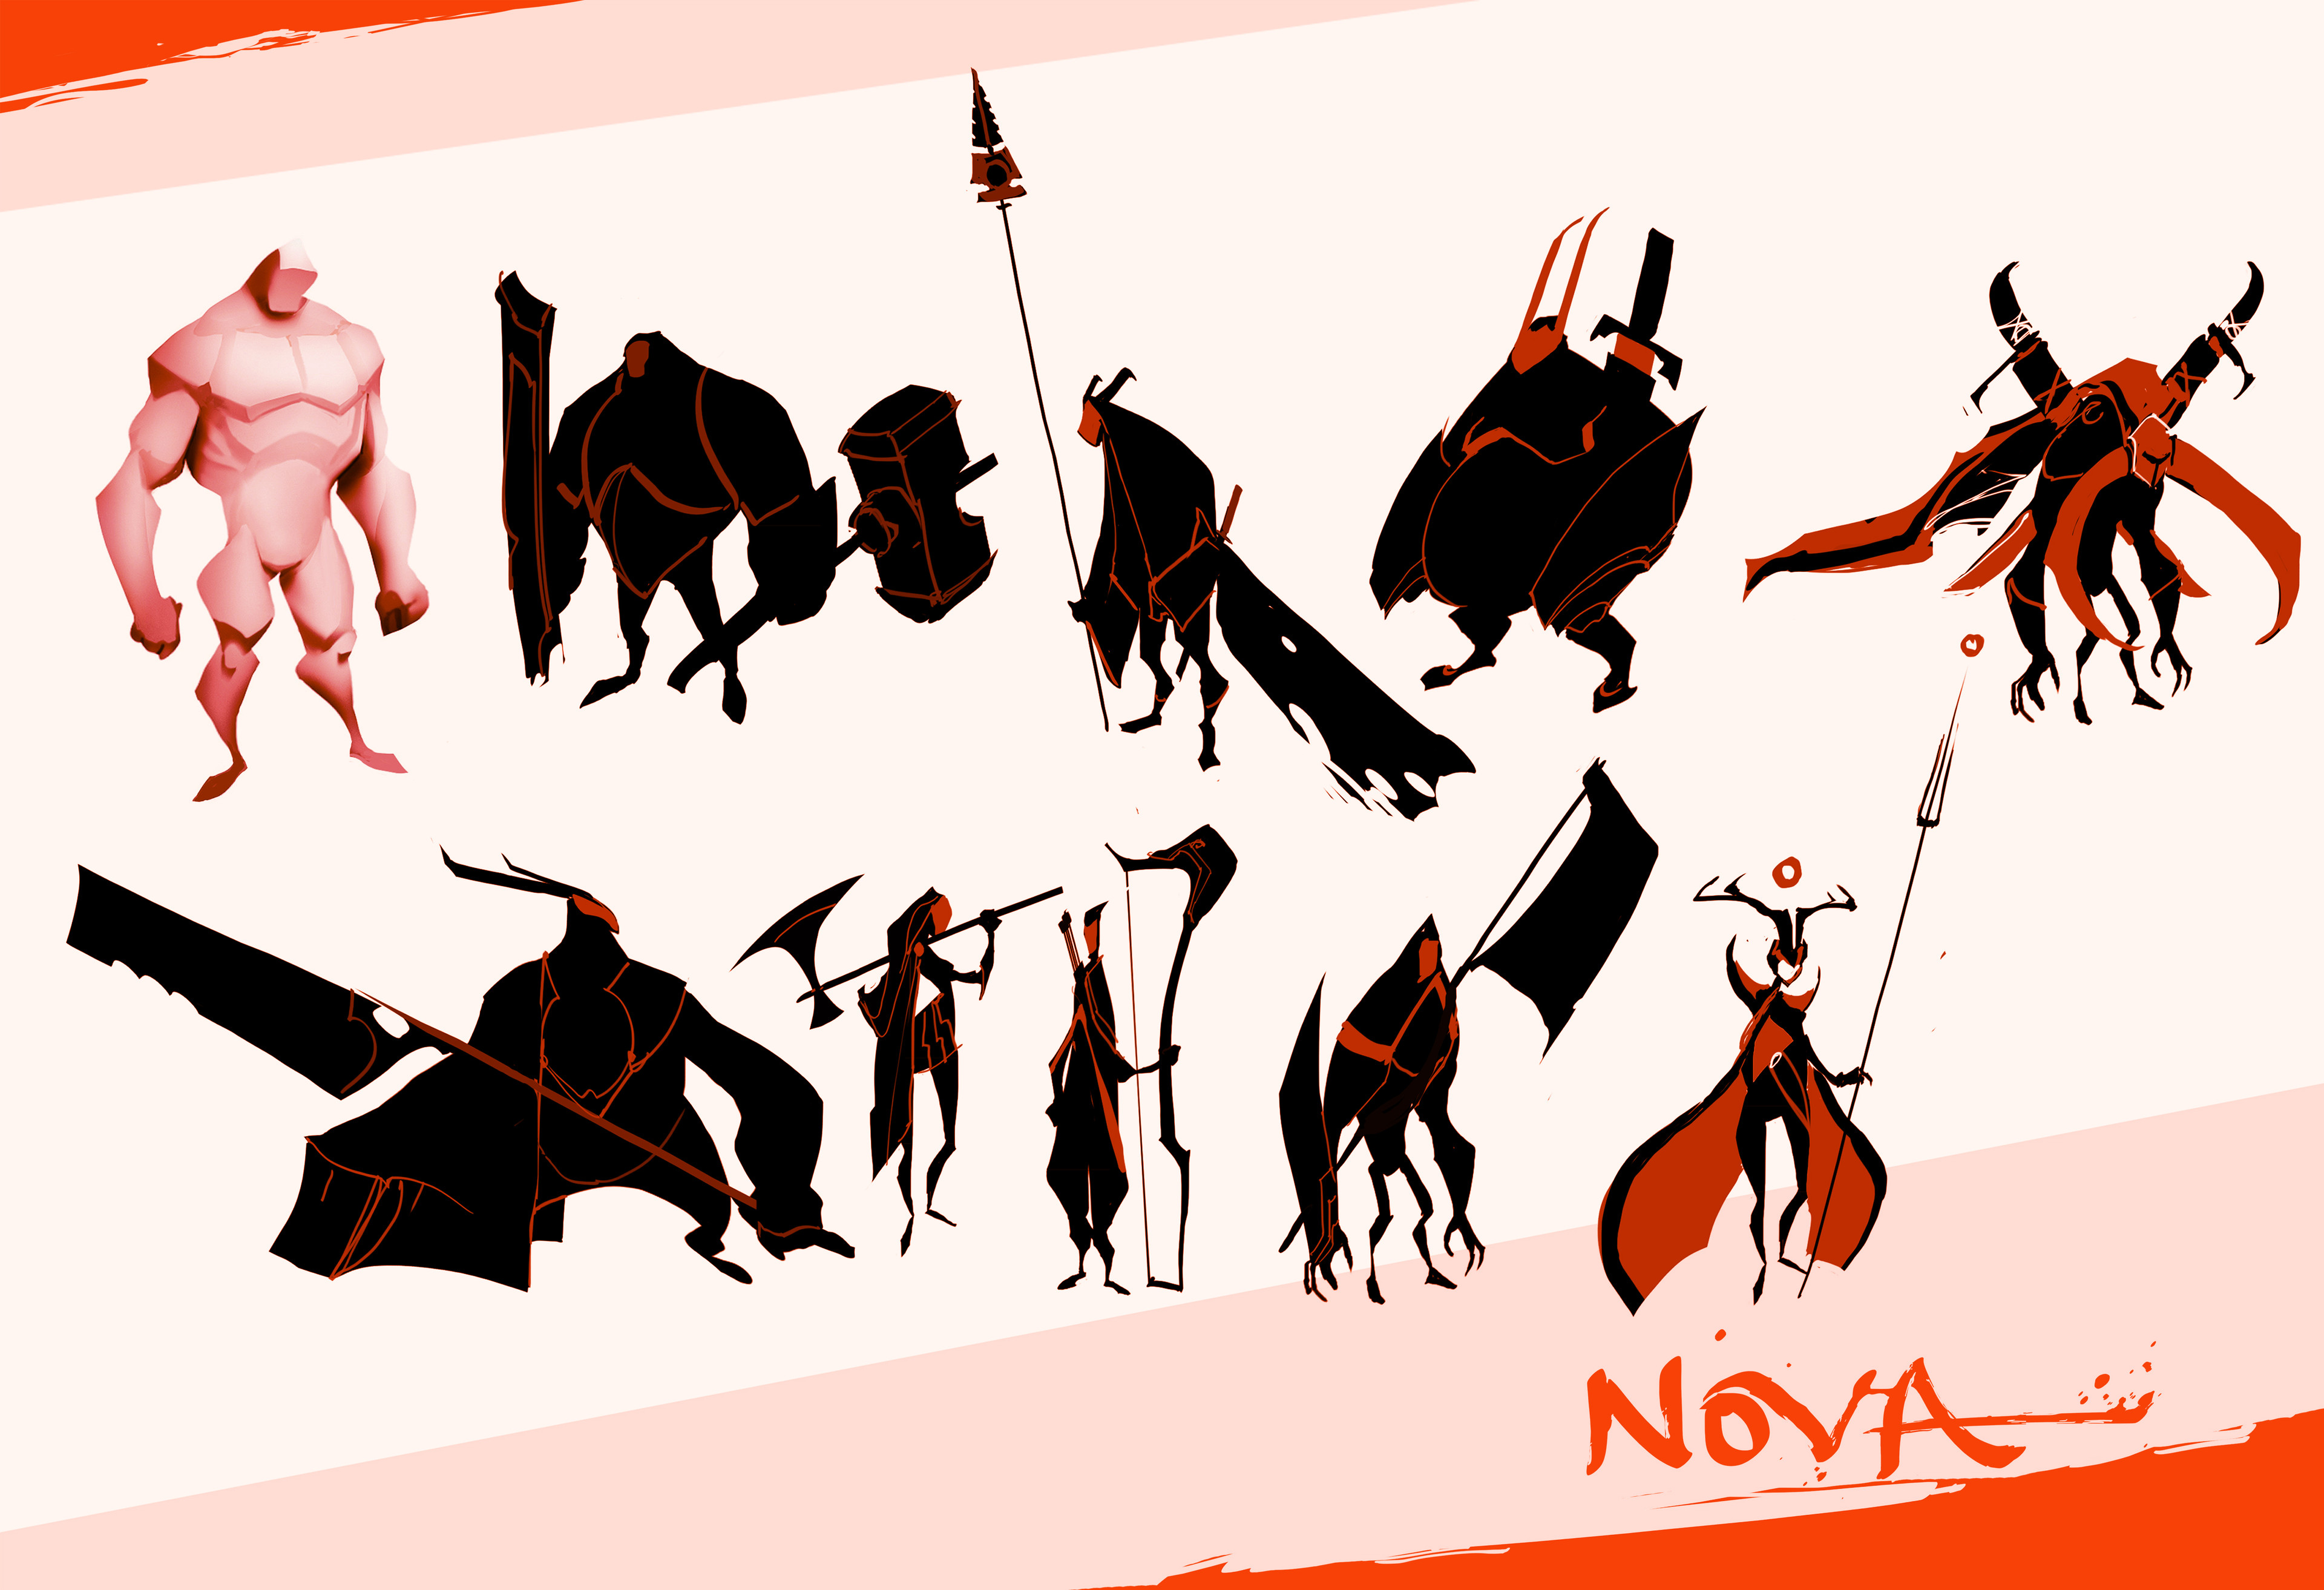 Initial exploration of heroes. I like starting with strong silhouettes, especially with the need for instant recognition by players swarmed by hundreds of characters.